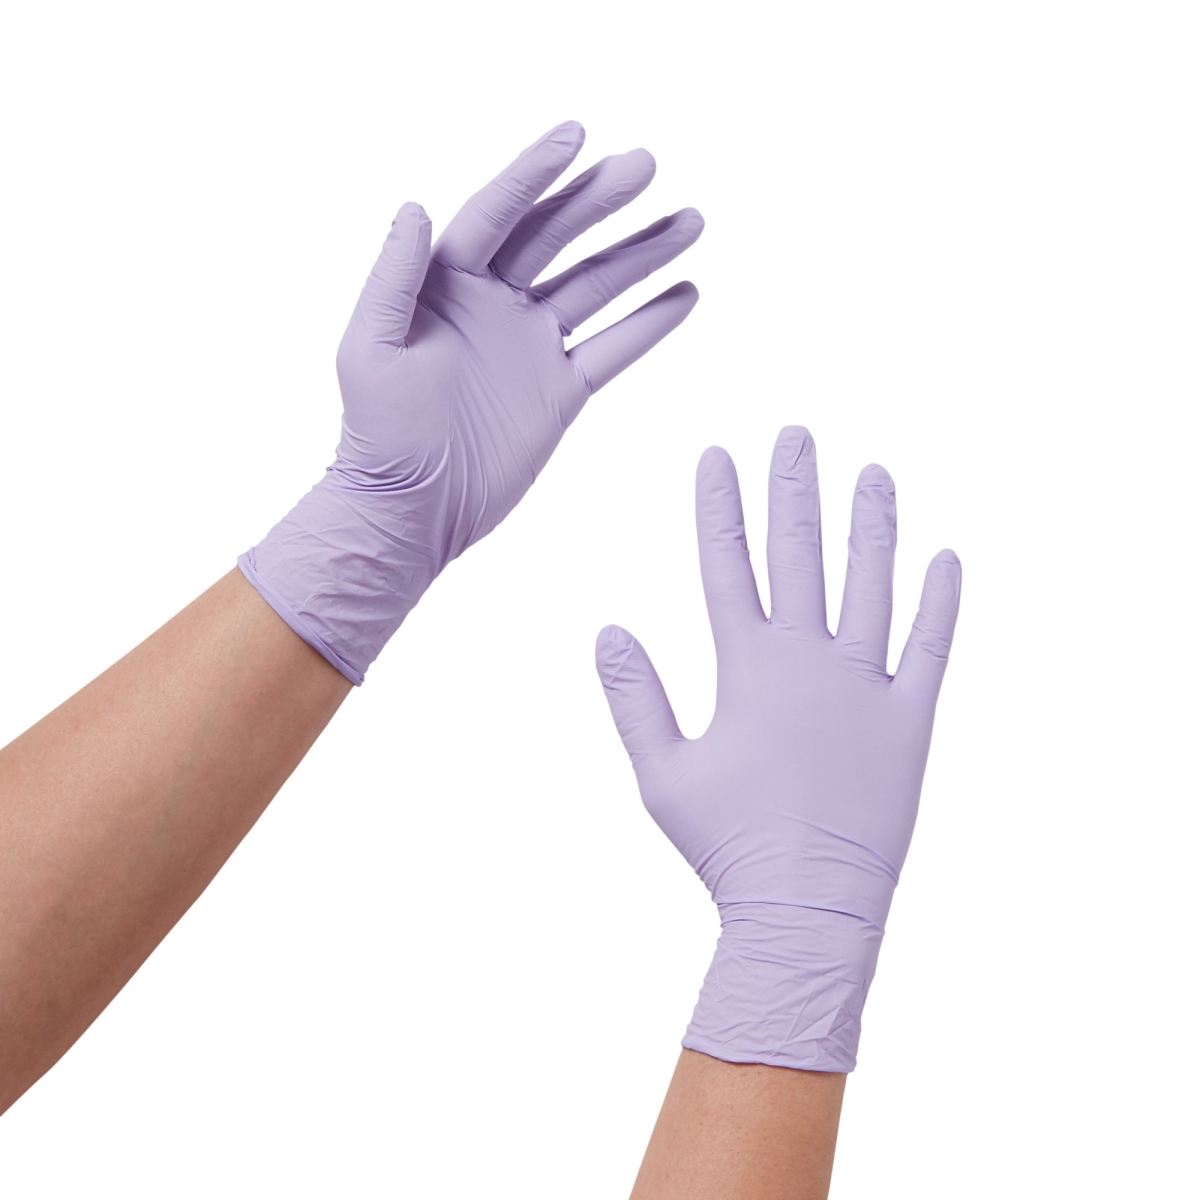 28201300 Lavender 9.5 in. Extra Large Nitrile Exam Glove, Pack of 2300 -  O & M HALYARD, 695803_CS